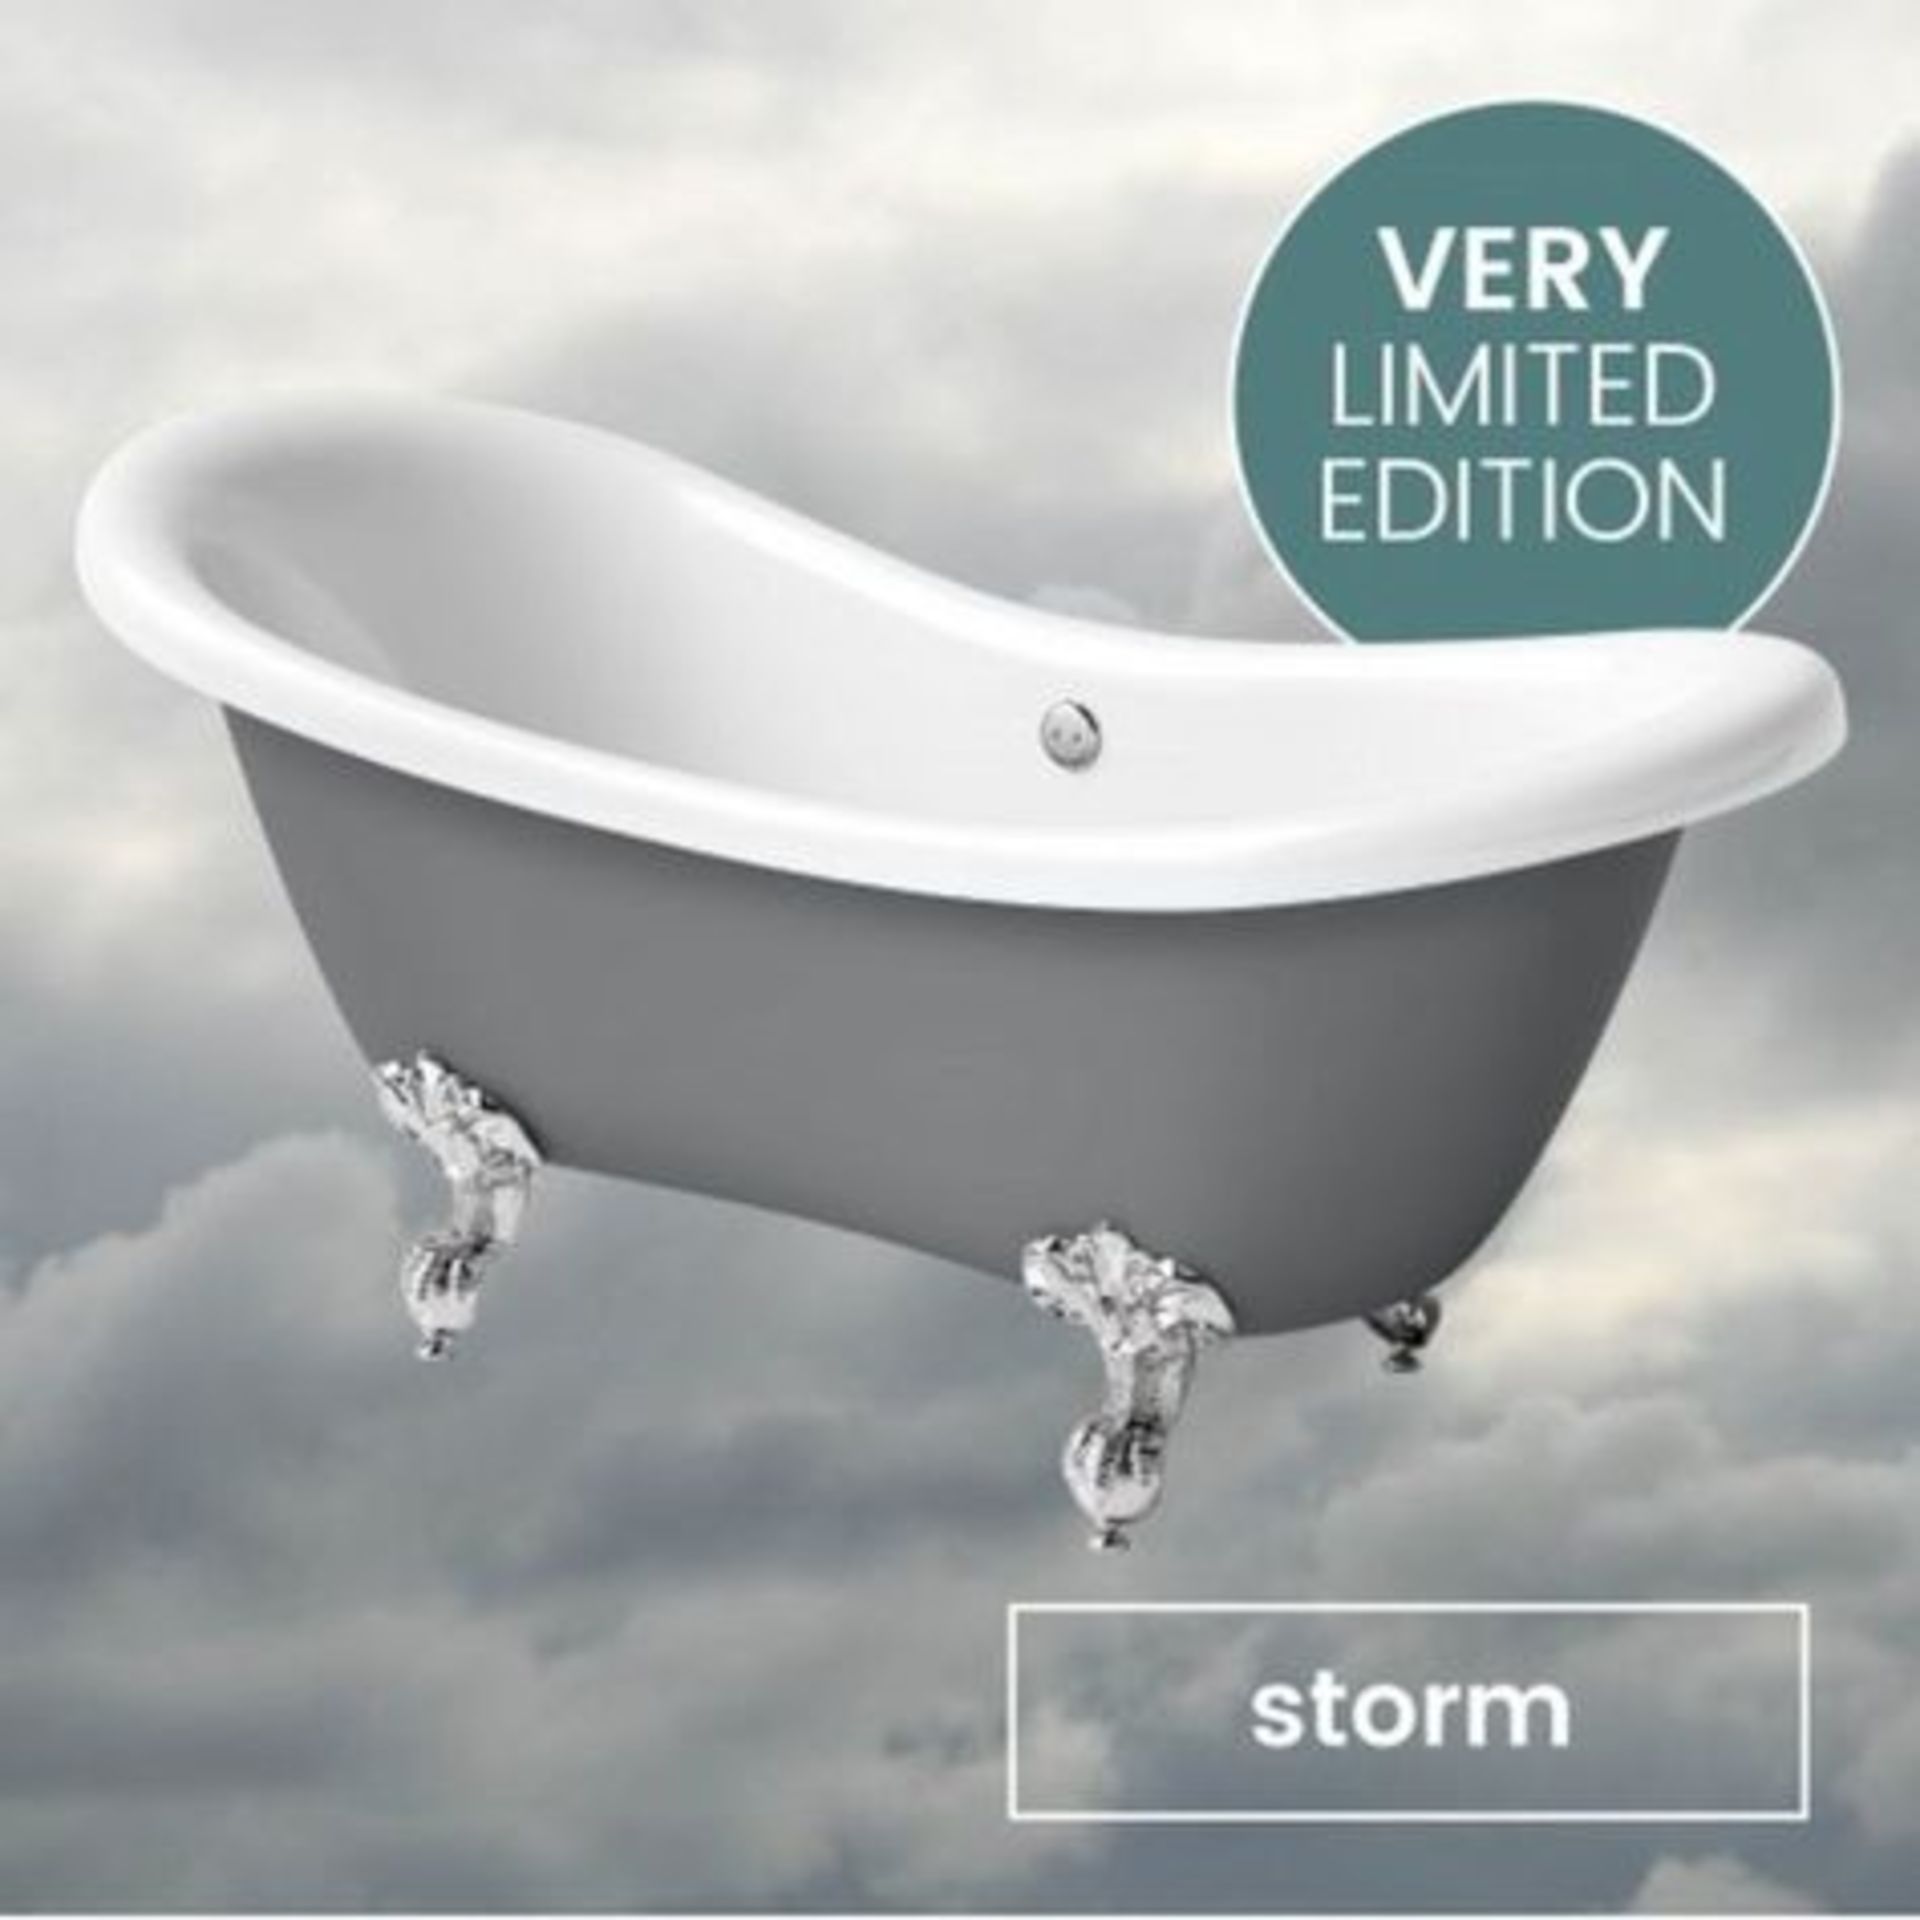 (AL40) 1700mm Storm Limited Edition Roller Top Freestanding Bath. Storm Limited Edition showcases - Image 2 of 2